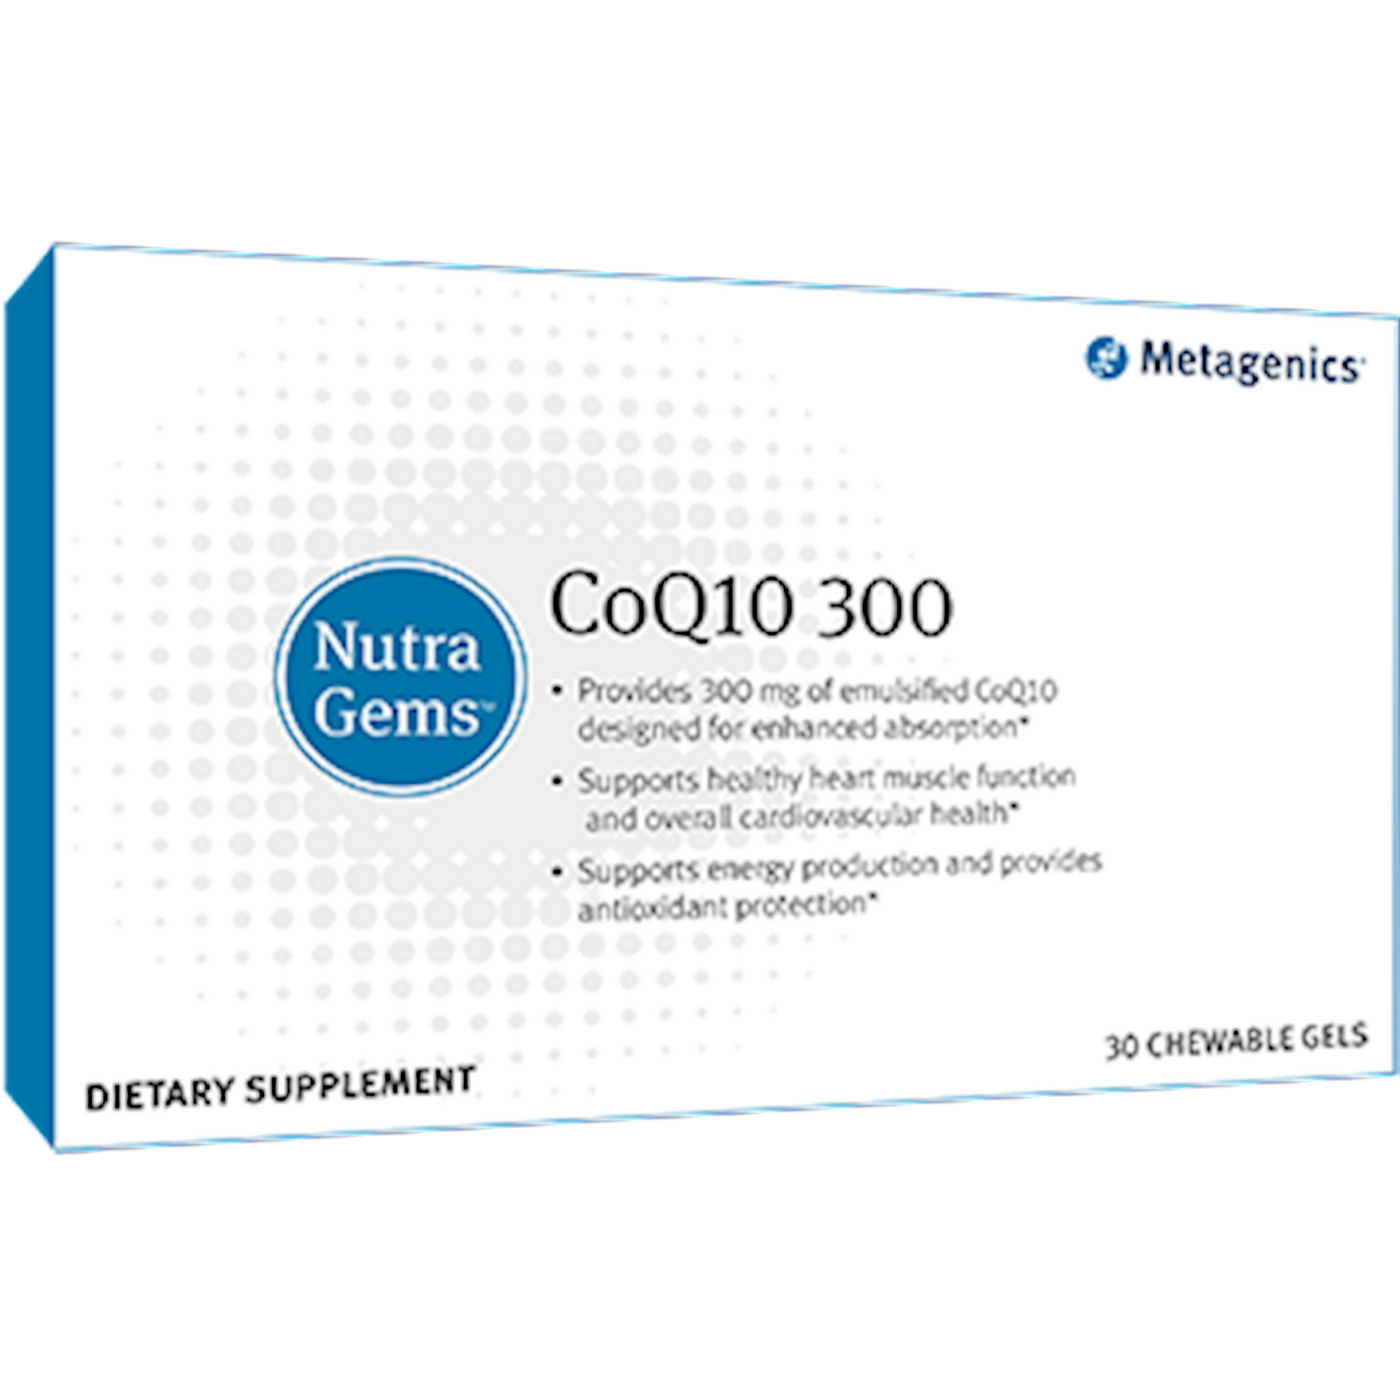 NutraGems CoQ10 300 30 Chewable Gels Curated Wellness